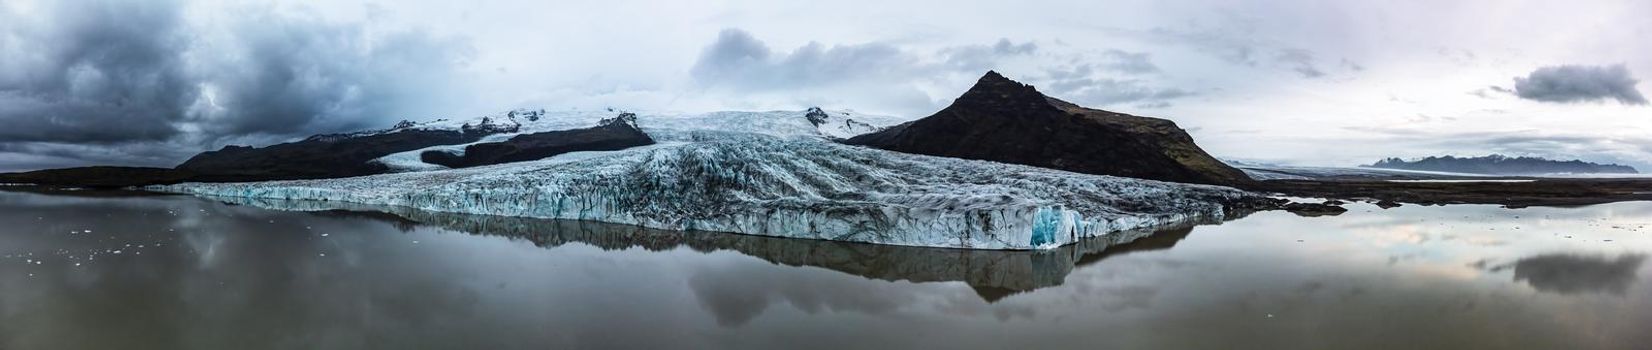 Glacier lake gigapan with massive glaciar tongue end in Iceland